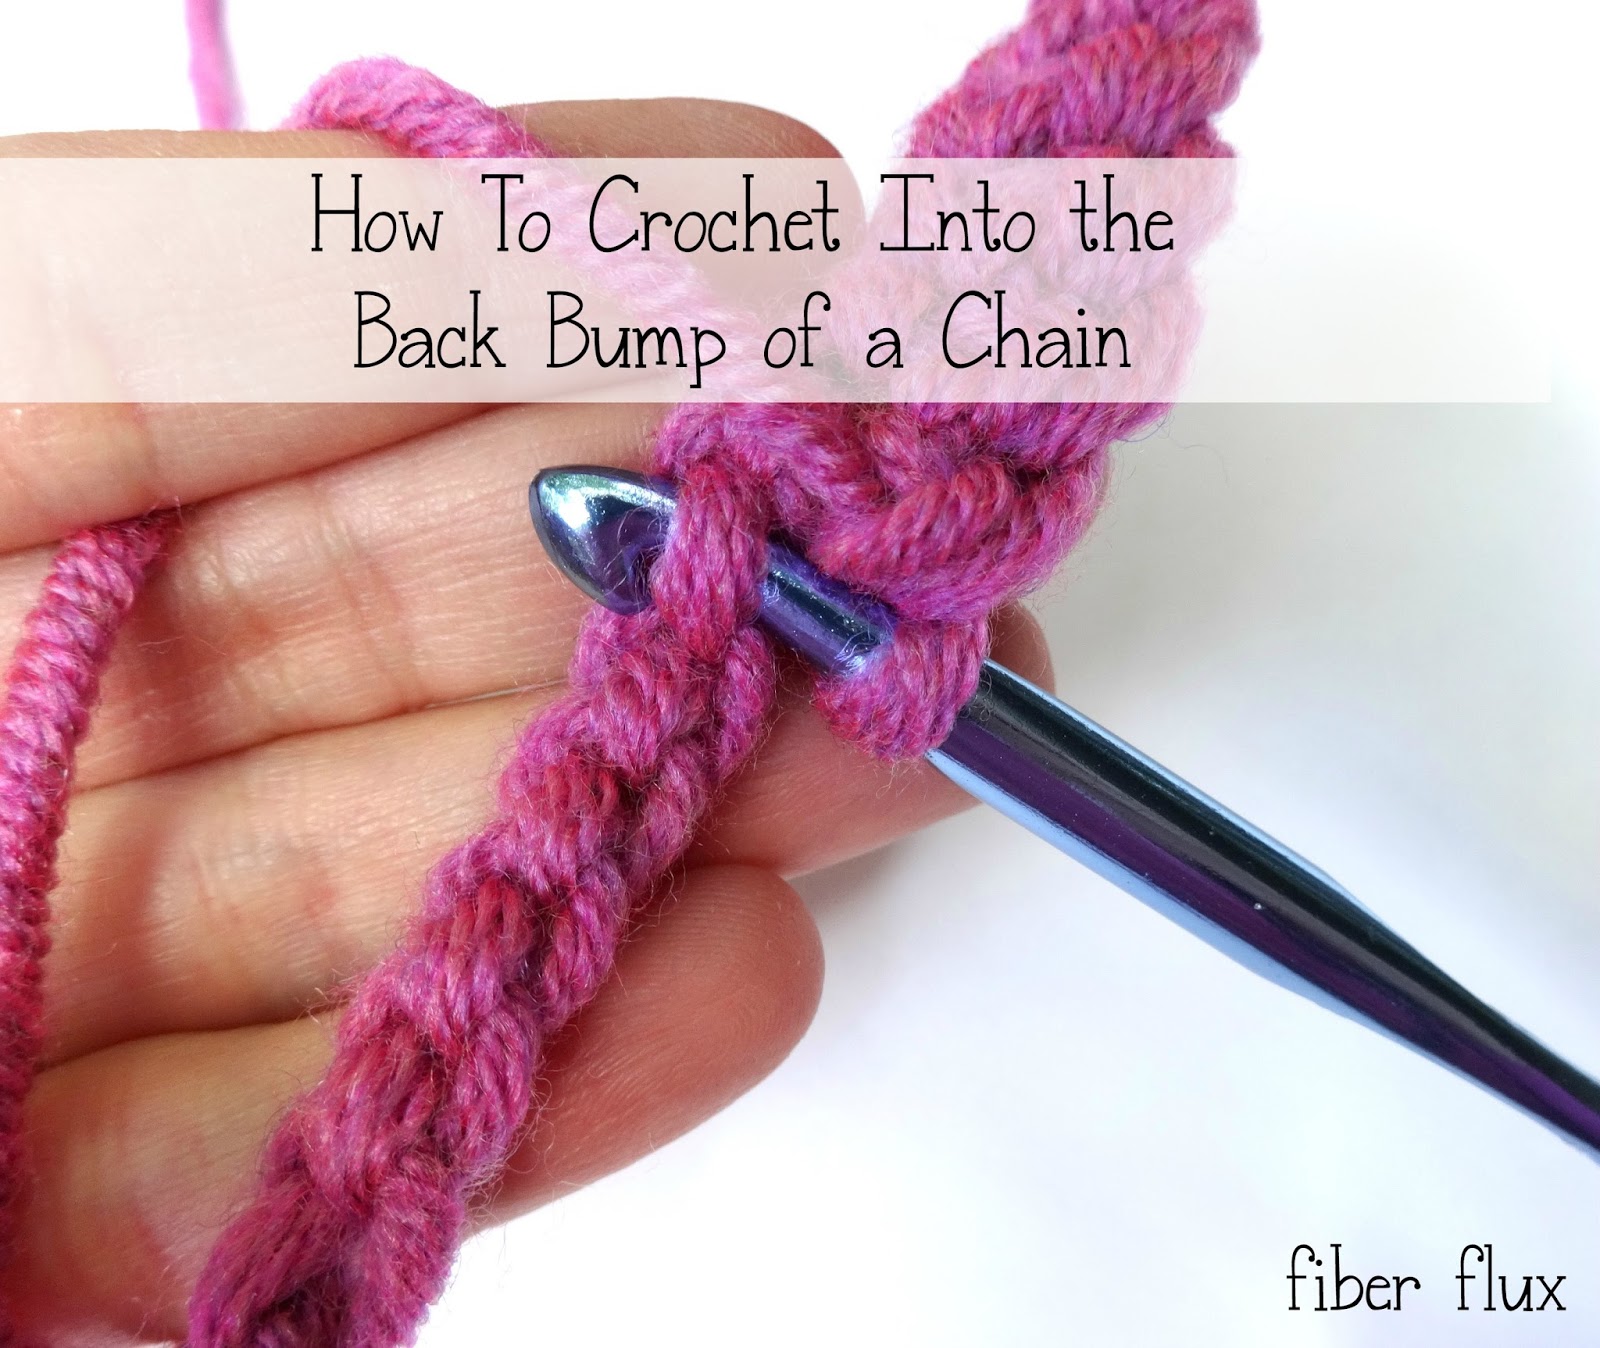 Fiber Flux: How To Crochet Into The Back Bump of A Chain